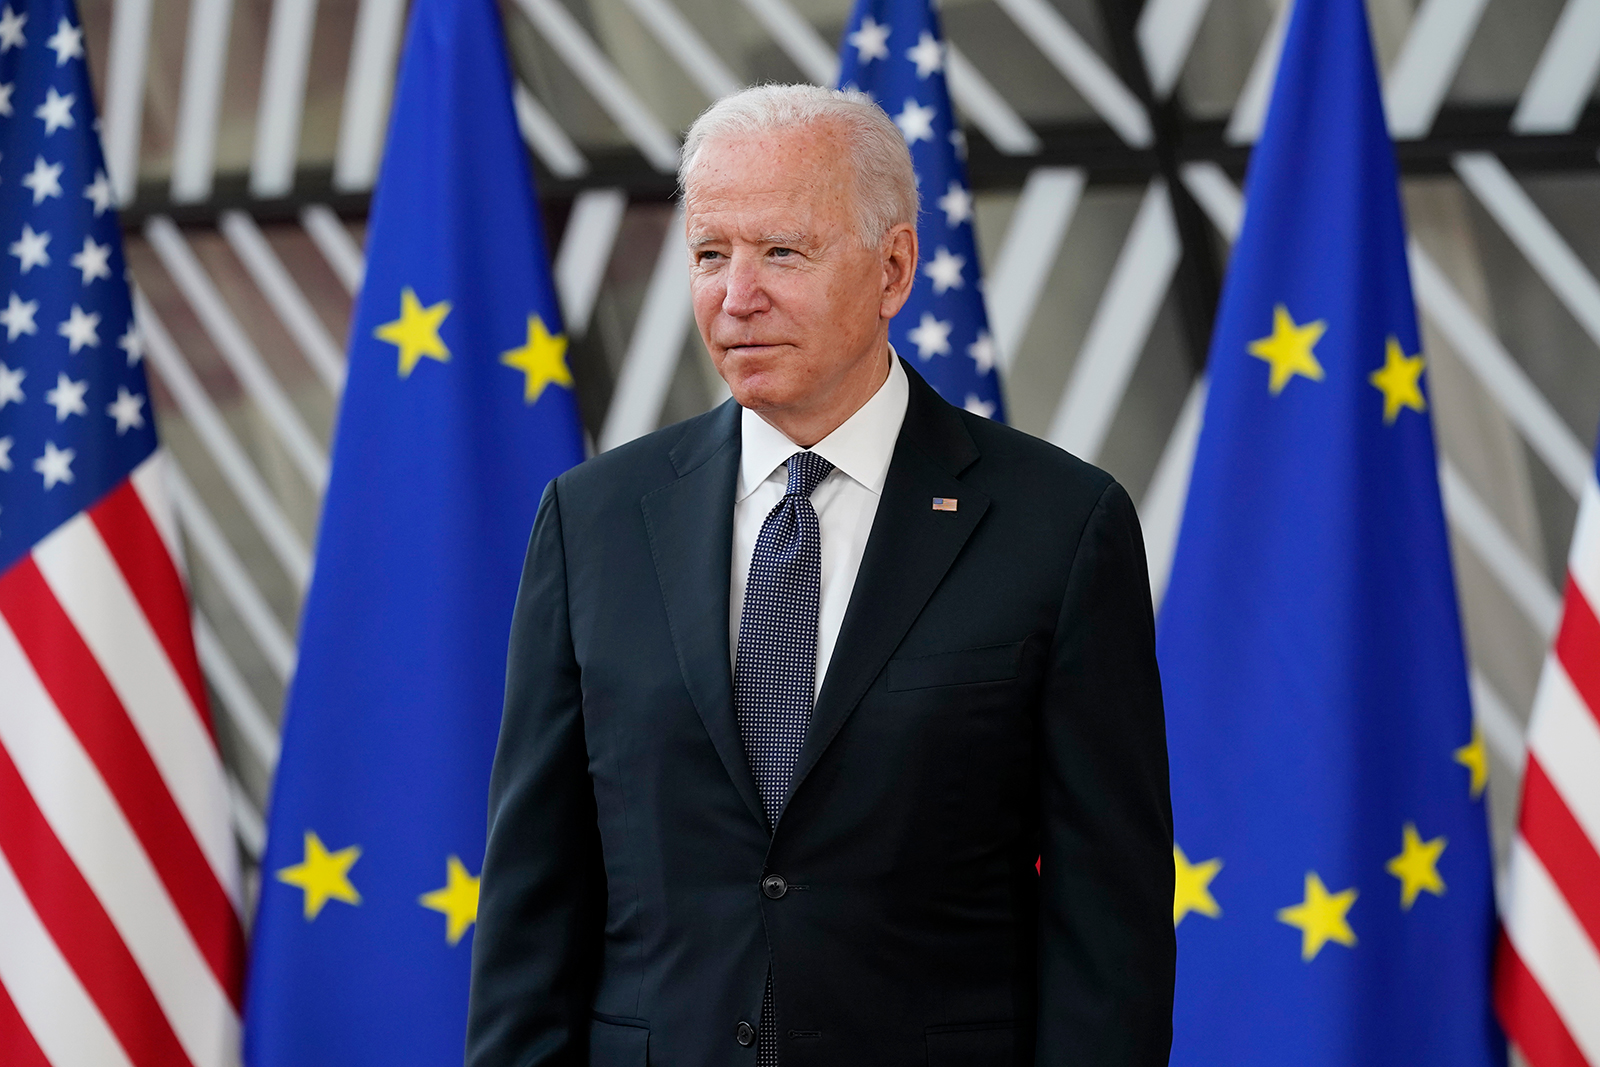 President Joe Biden arrives for the United States-European Union Summit at the European Council in Brussels on June 15.